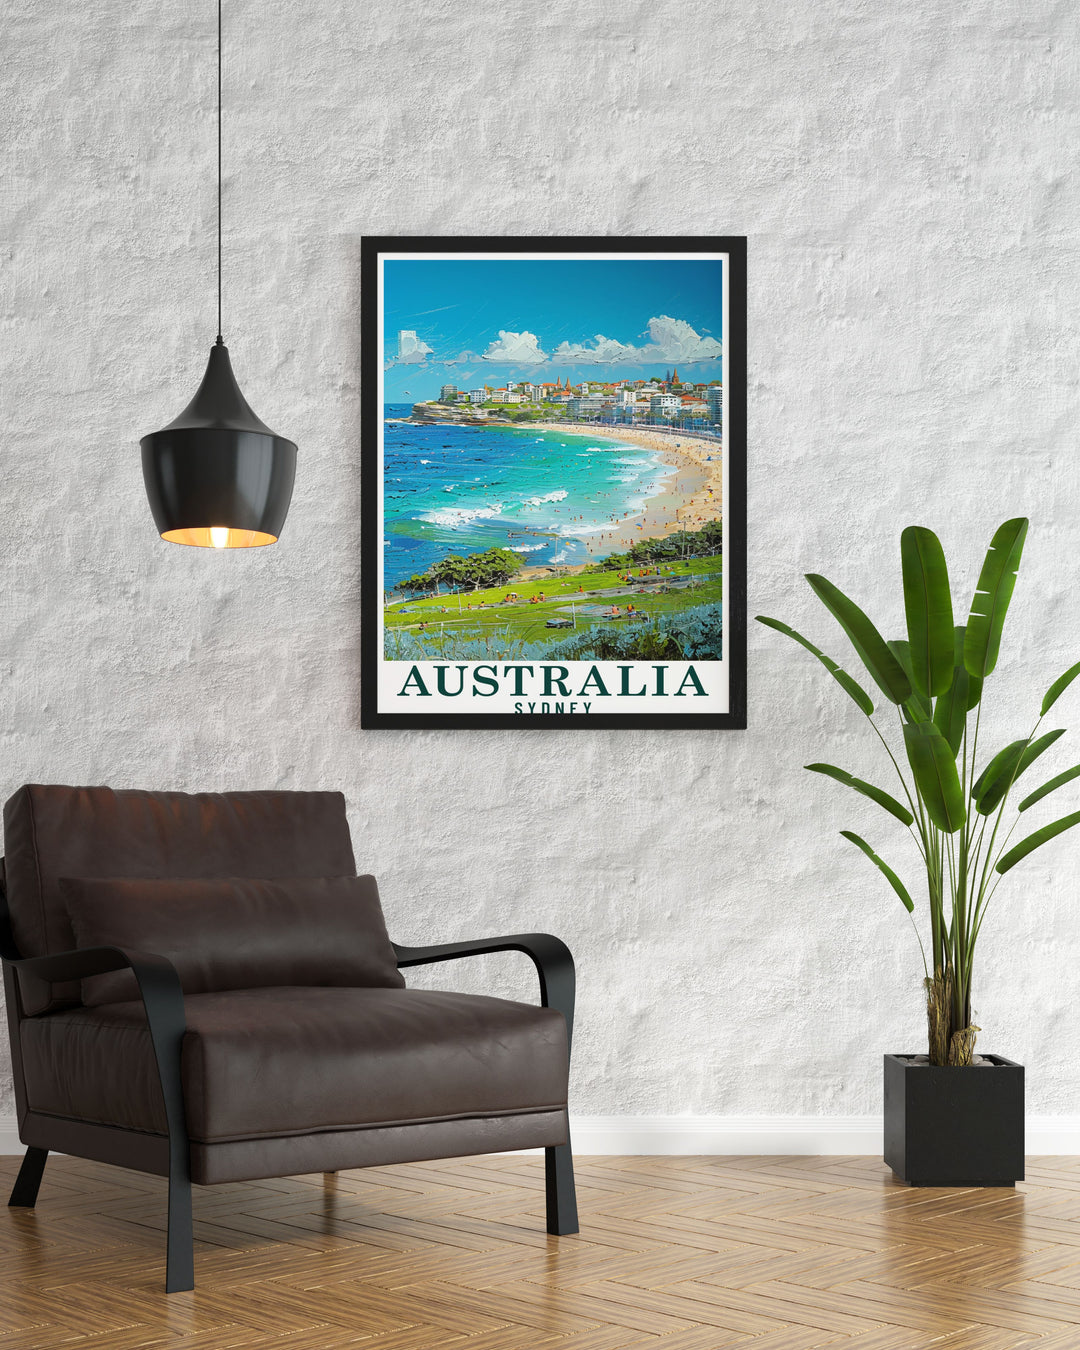 Experience the vibrant atmosphere of Bondi Beach with this art print, showcasing the golden sands and crystal clear waters of one of Australias most famous beaches. Perfect for any coastal decor.